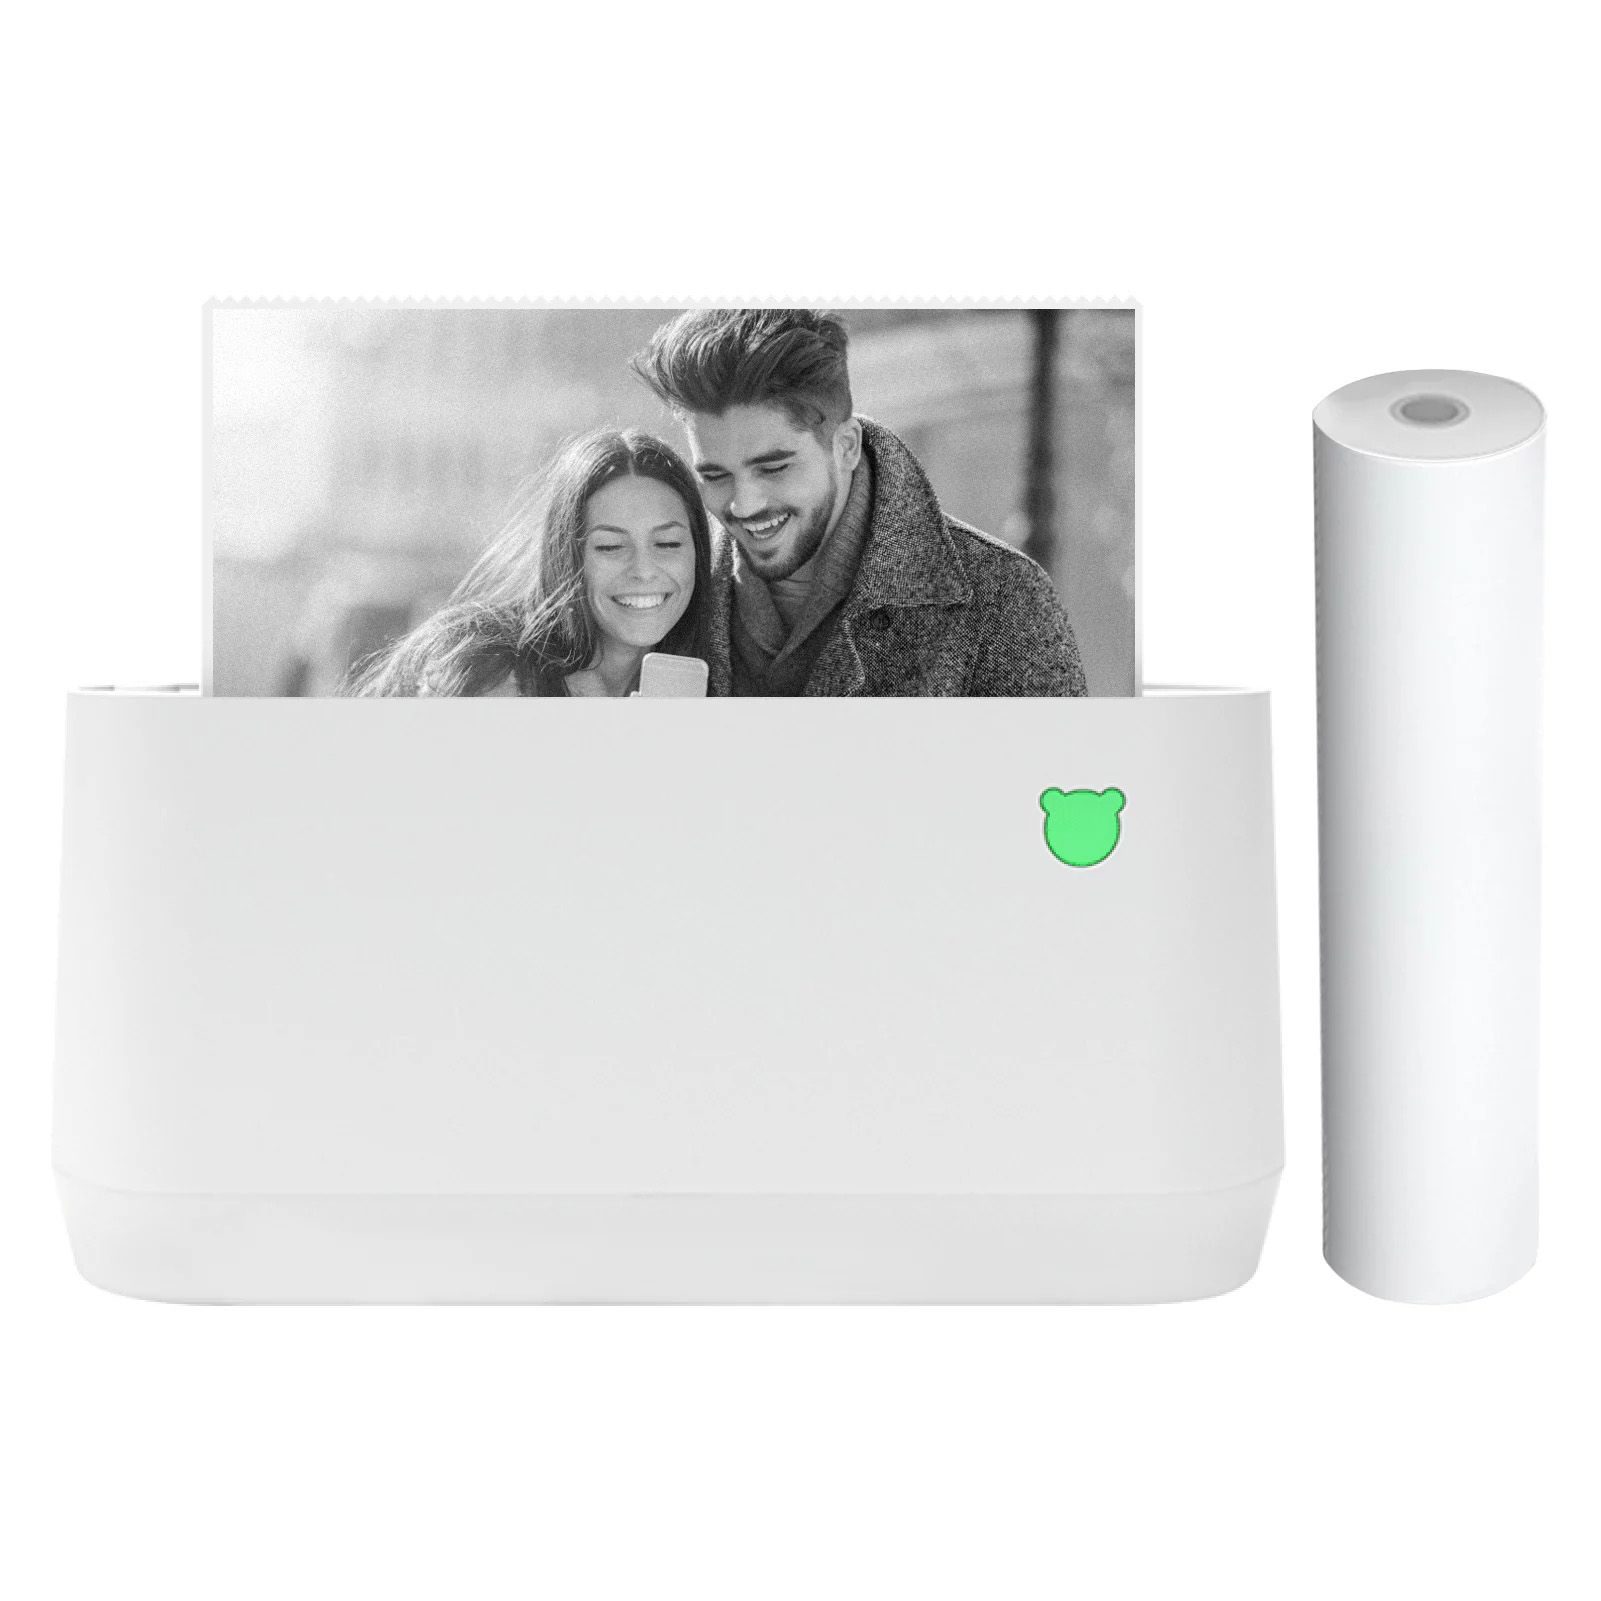 Mini Portable Photo Mobile Printer 304dpi BT Wireless Thermal Printer Receipt Label Maker Sticker Support 107mm/77mm/57mm Paper Width Compatible with Android iOS Windows for Photo Wo